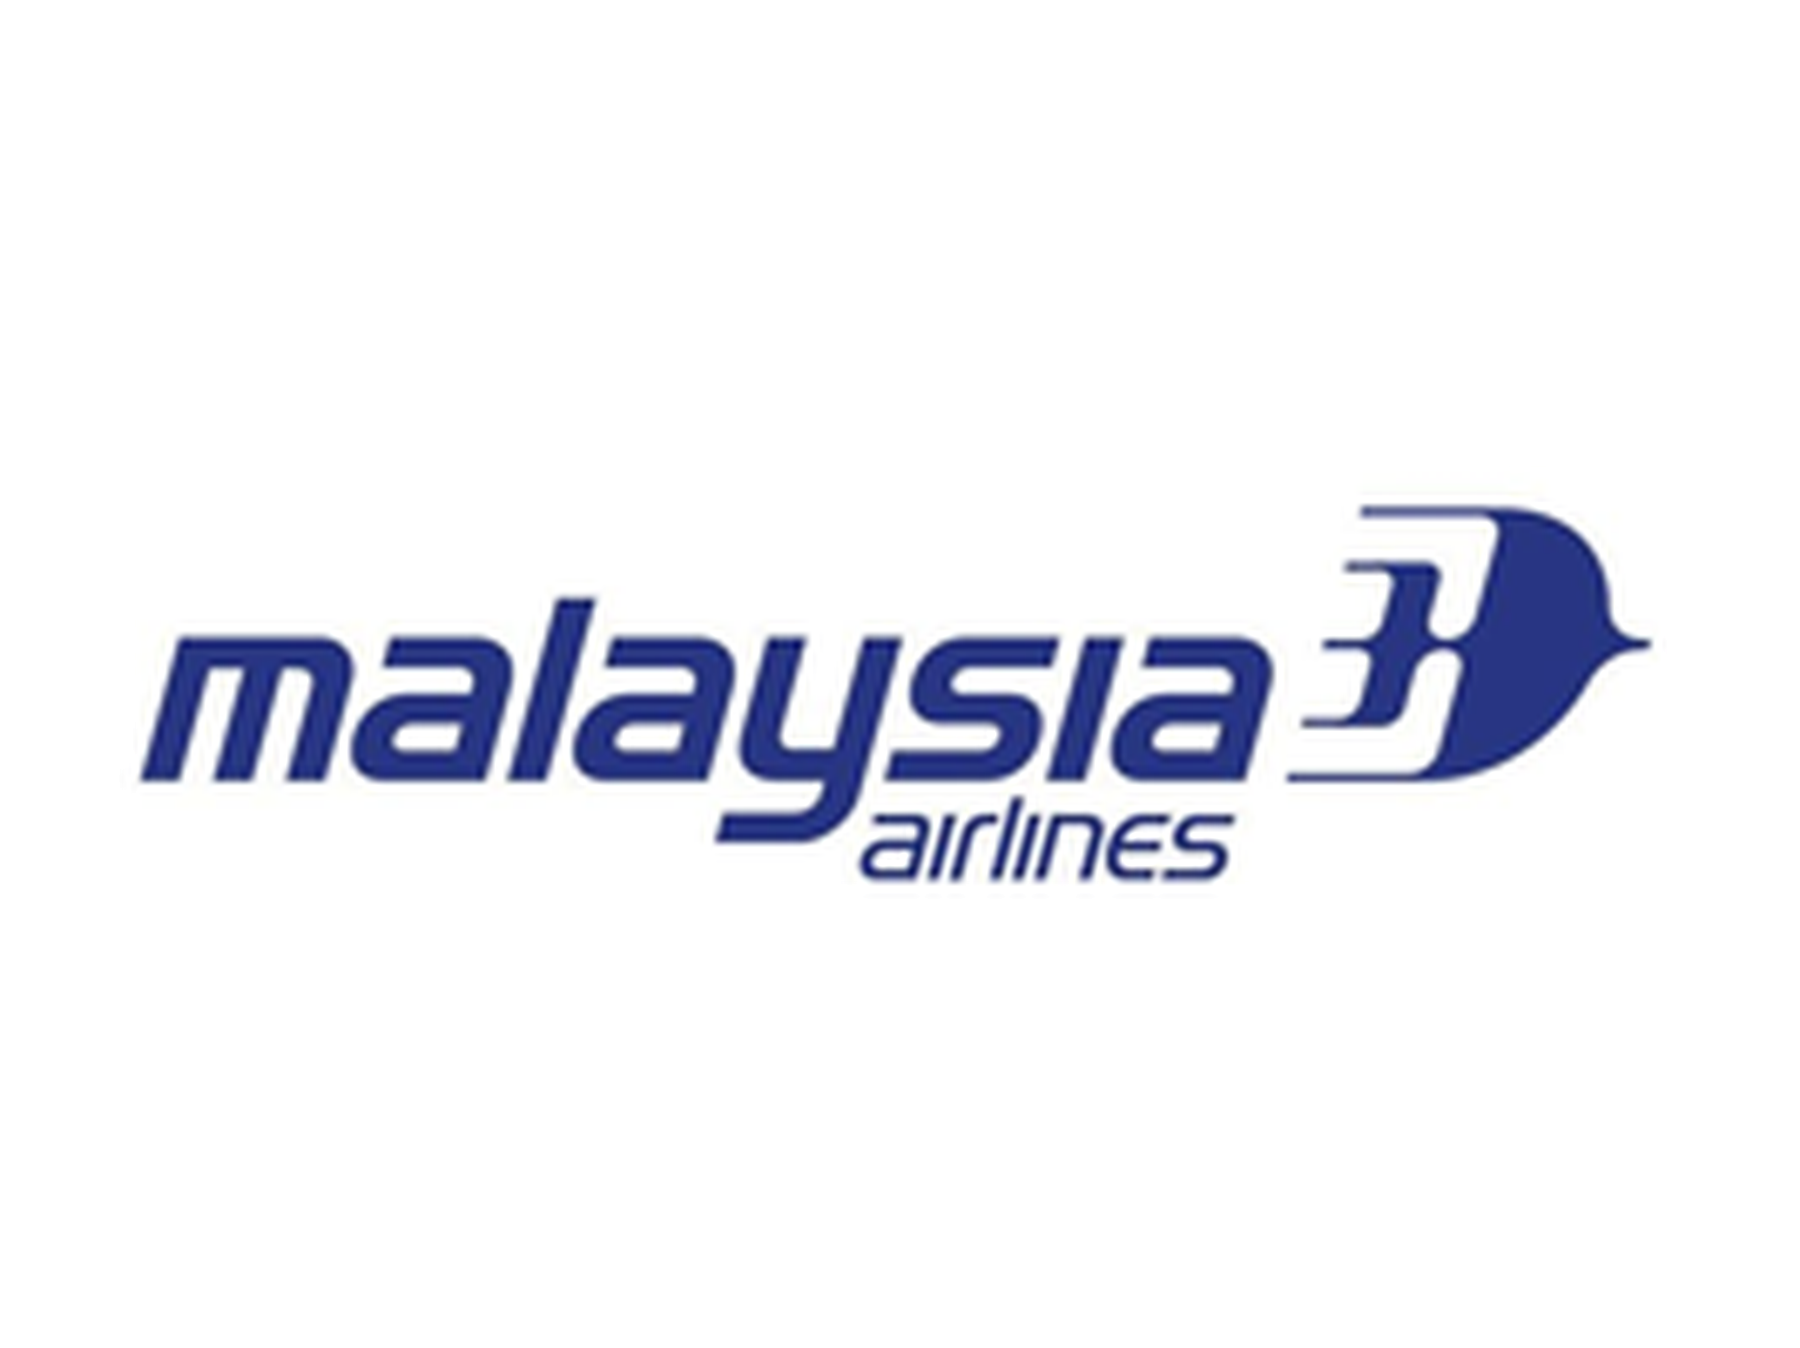 Malaysia Airlines Promo Code